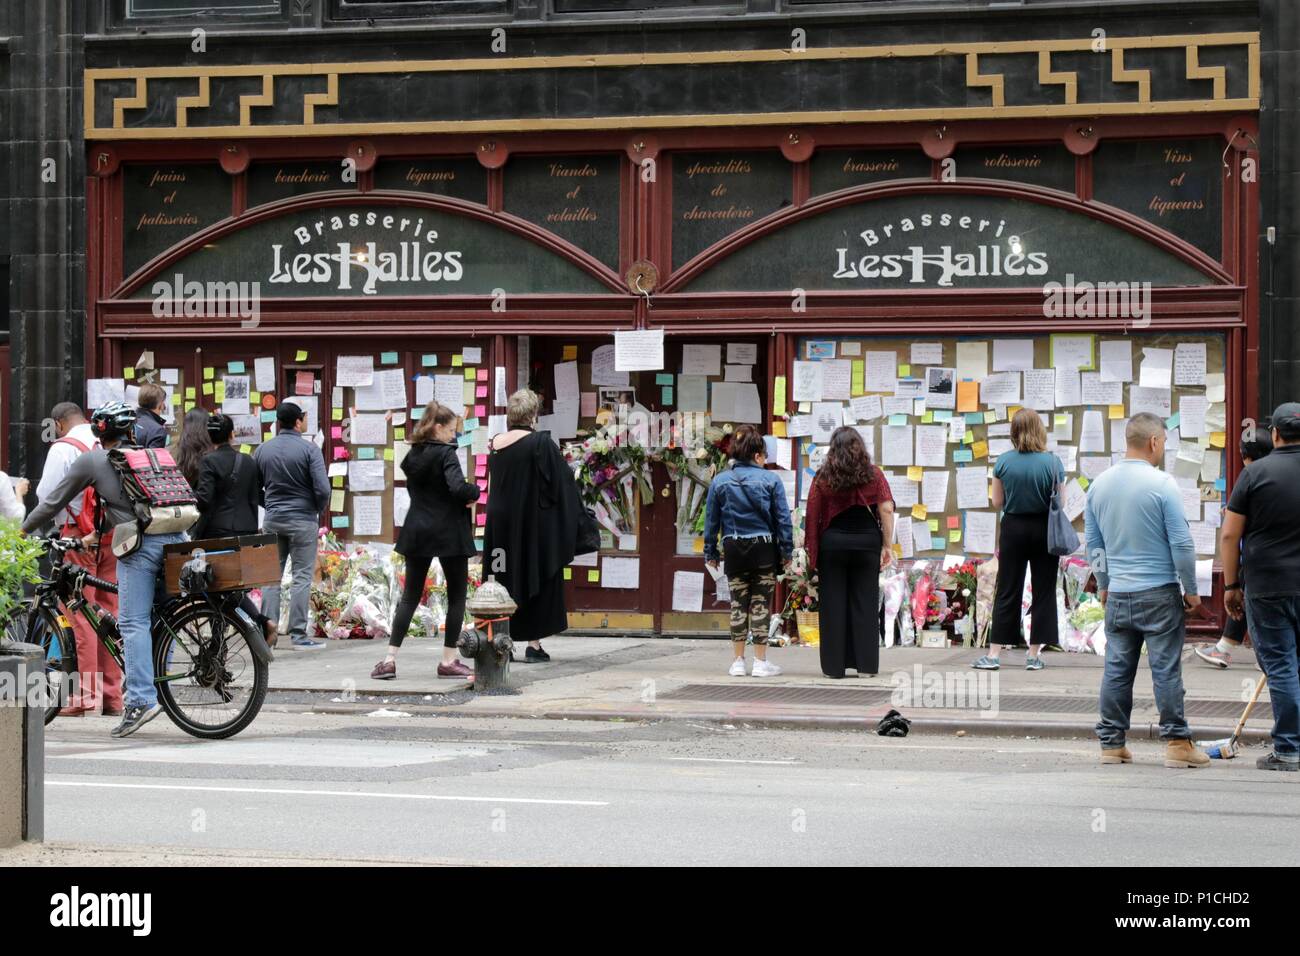 New York City New York Usa 11th June 2018 Since Friday Mourners Have Gathered To Leave Flowers And Messages At Brasserie Les Halles The Now Shuttered Park Avenue Restaurant Where Celebrity Chef Anthony